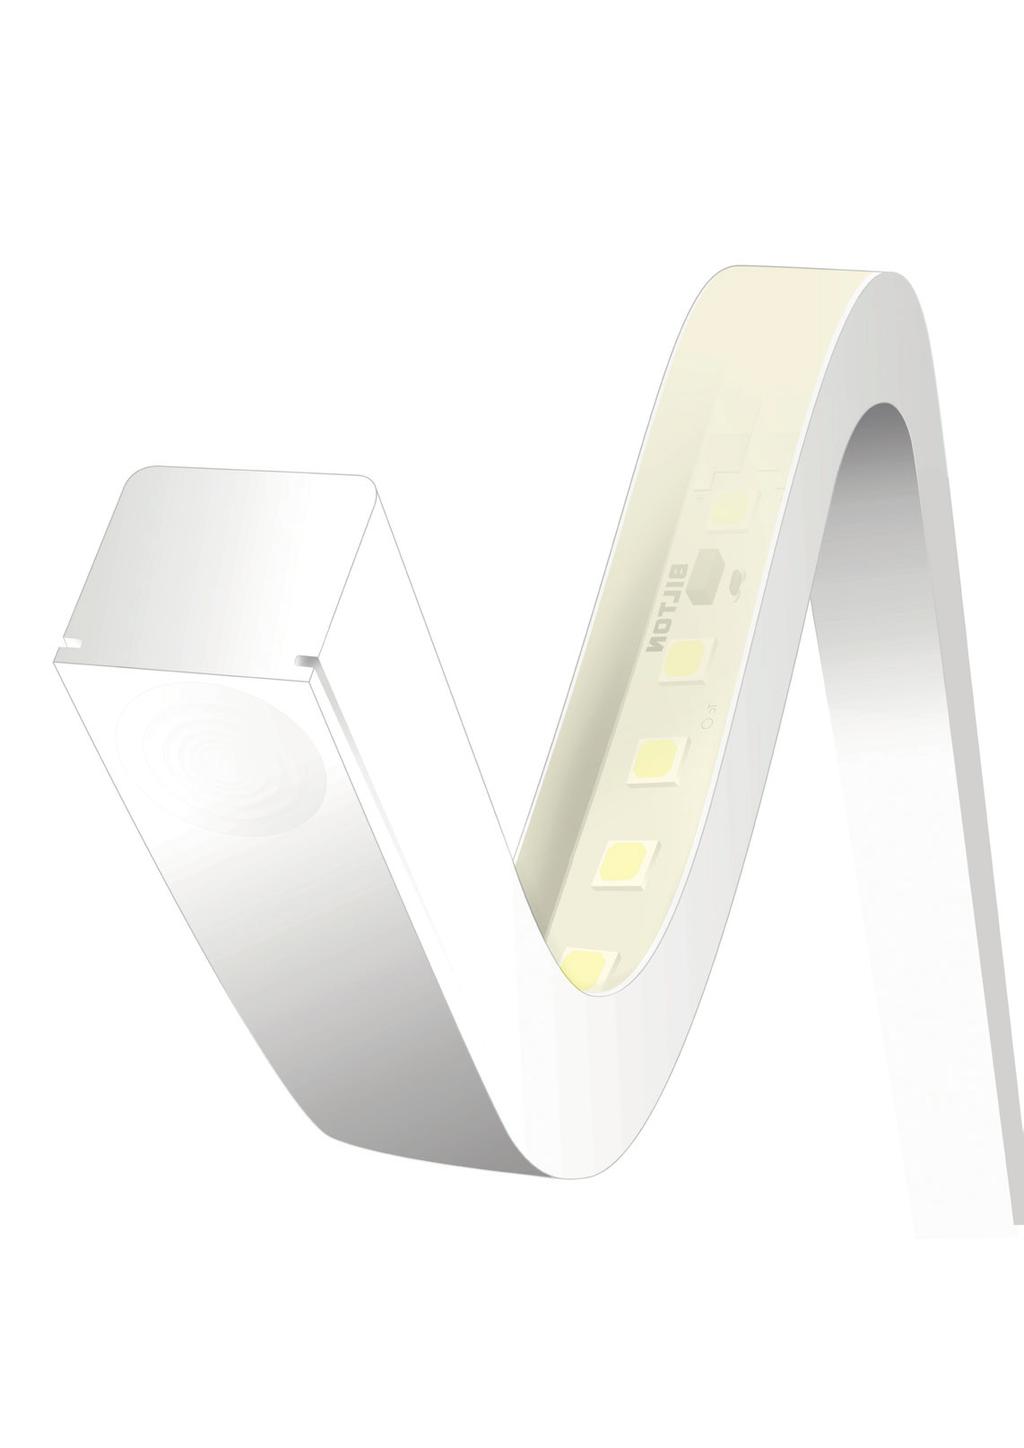 FOR A CONTACTLESS THE CONVENTIONAL CONTROL OF LINEAR LED LIGHTING STRIPS BY MEANS OF CONSTANT VOLTAGE ENTAILS SOME DIS IN CERTAIN APPLICATIONS.